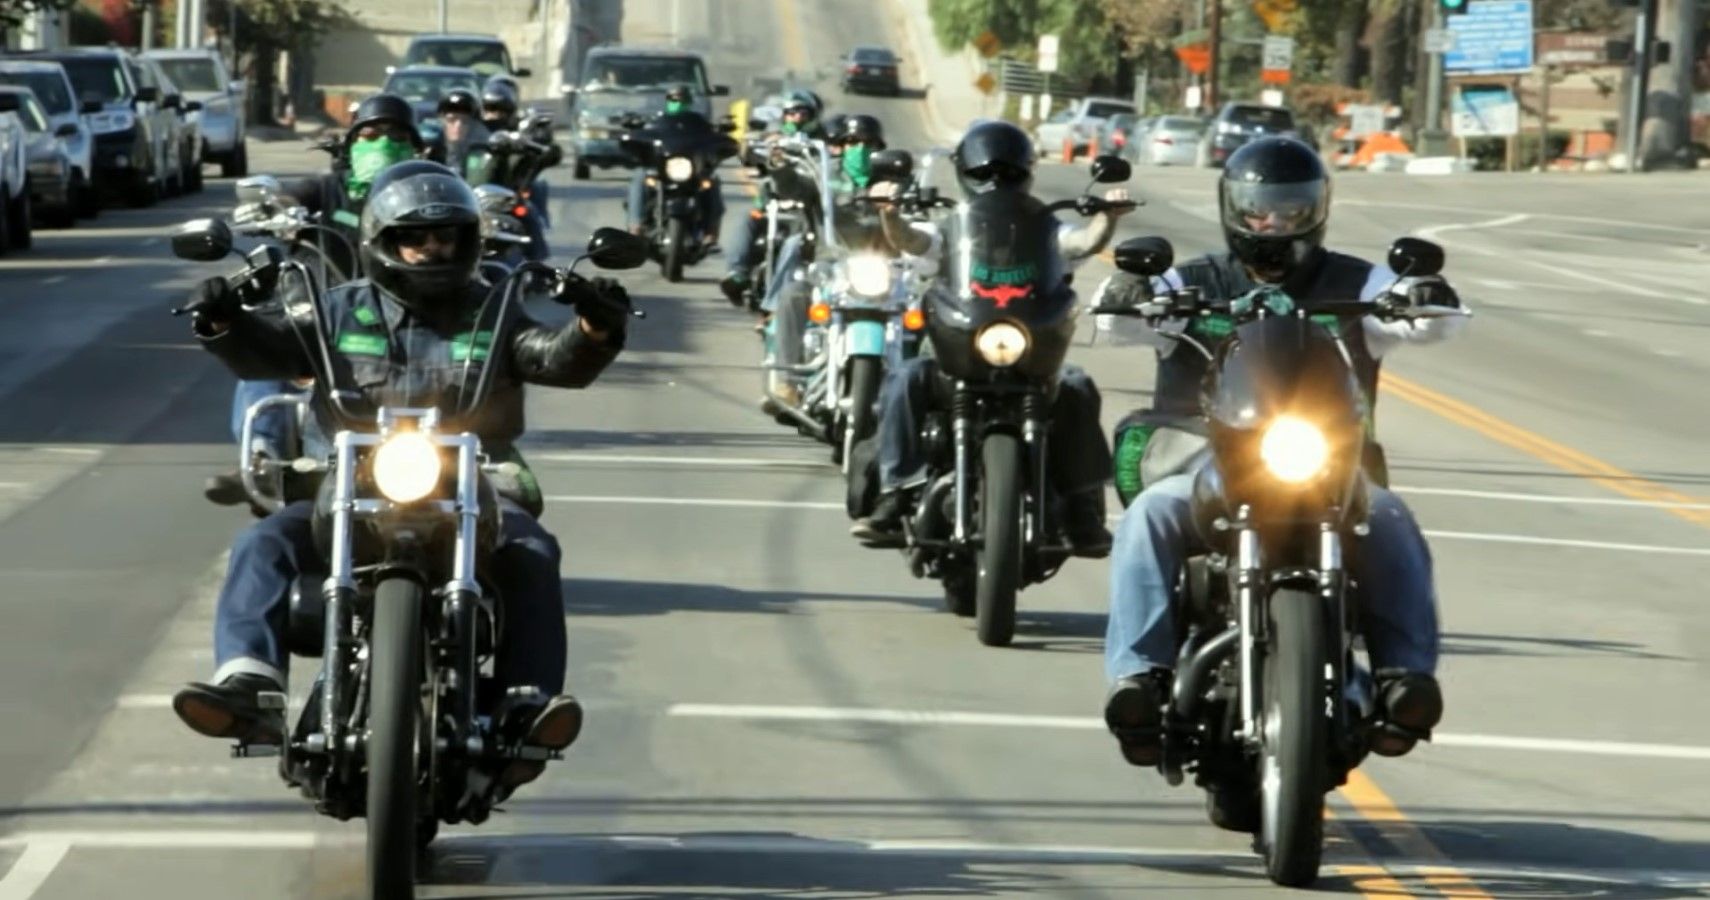 Vagos Motorcycle Club on the roll 